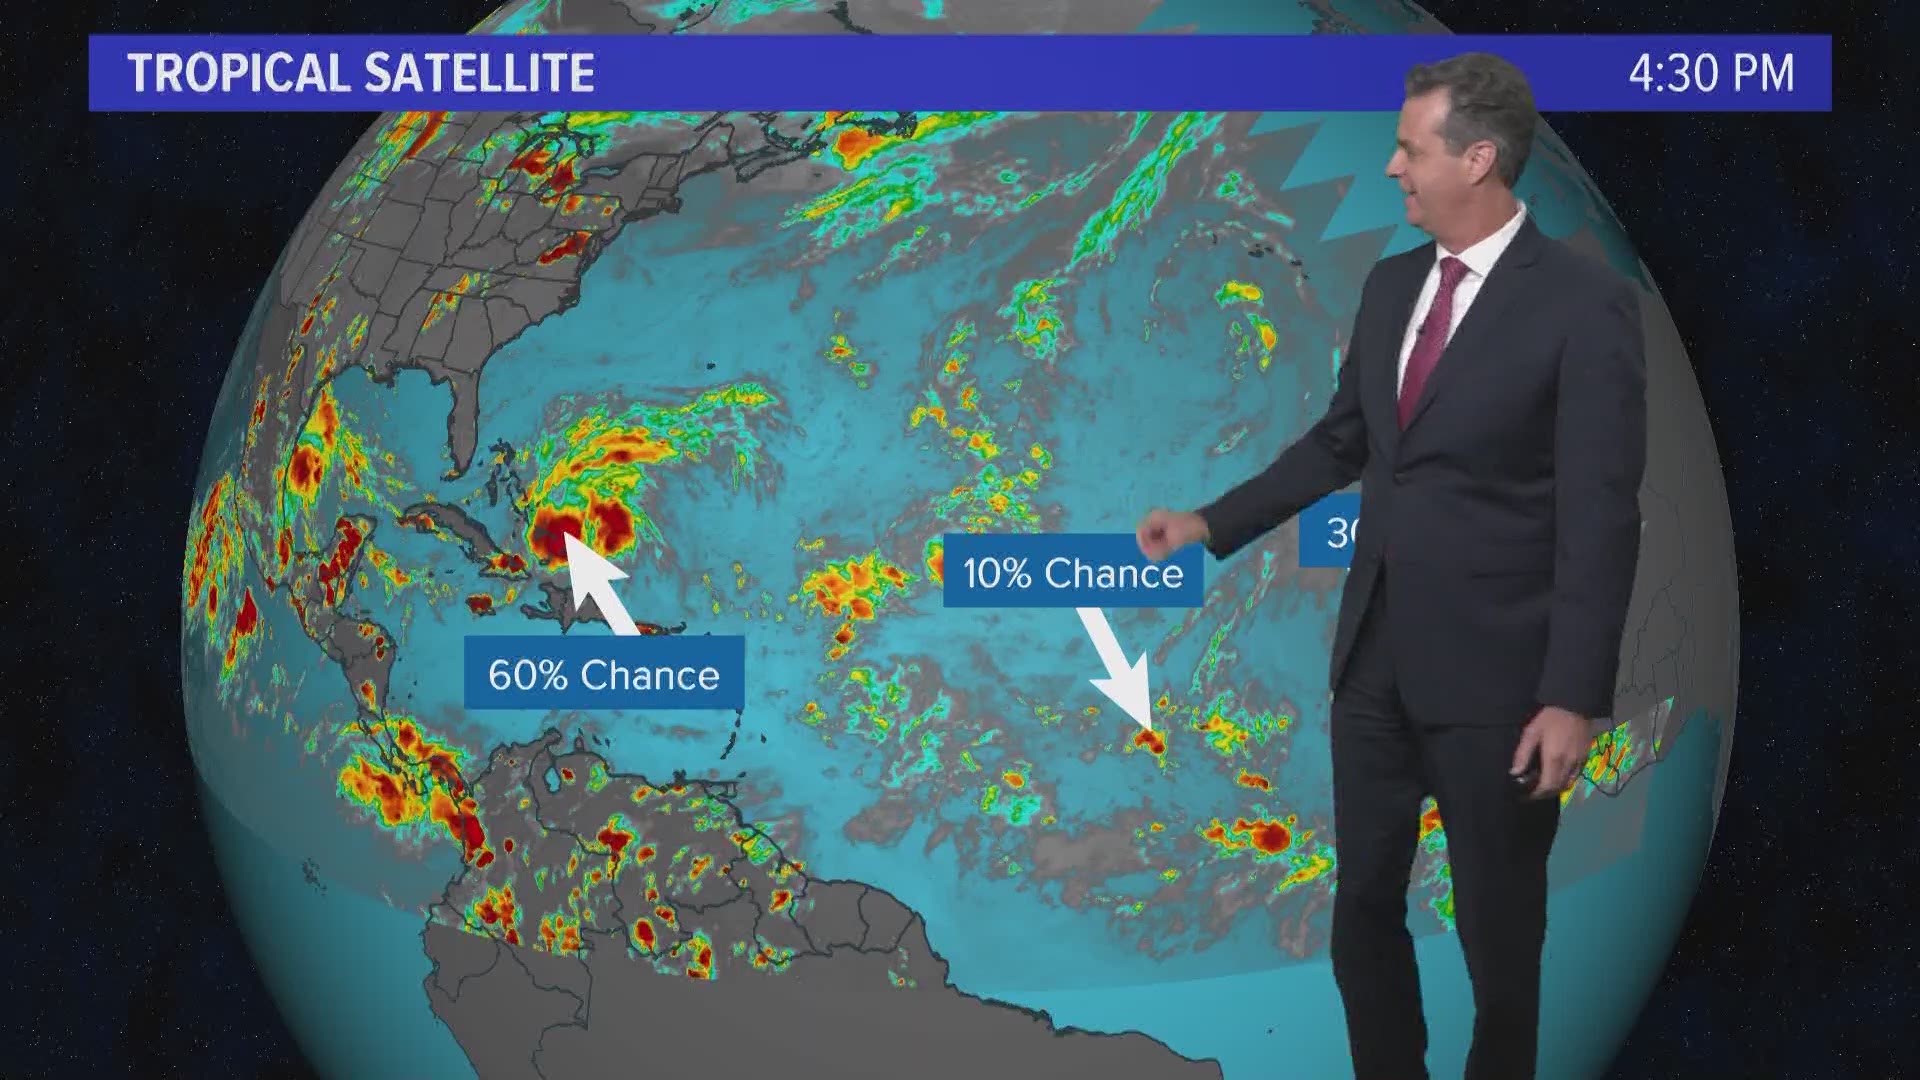 The KHOU 11 Weather team is monitoring a very disorganized cluster of thunderstorms near Turks and Caicos that is expected to move across the Florida straits into the eastern portion of the Gulf of Mexico by Saturday.